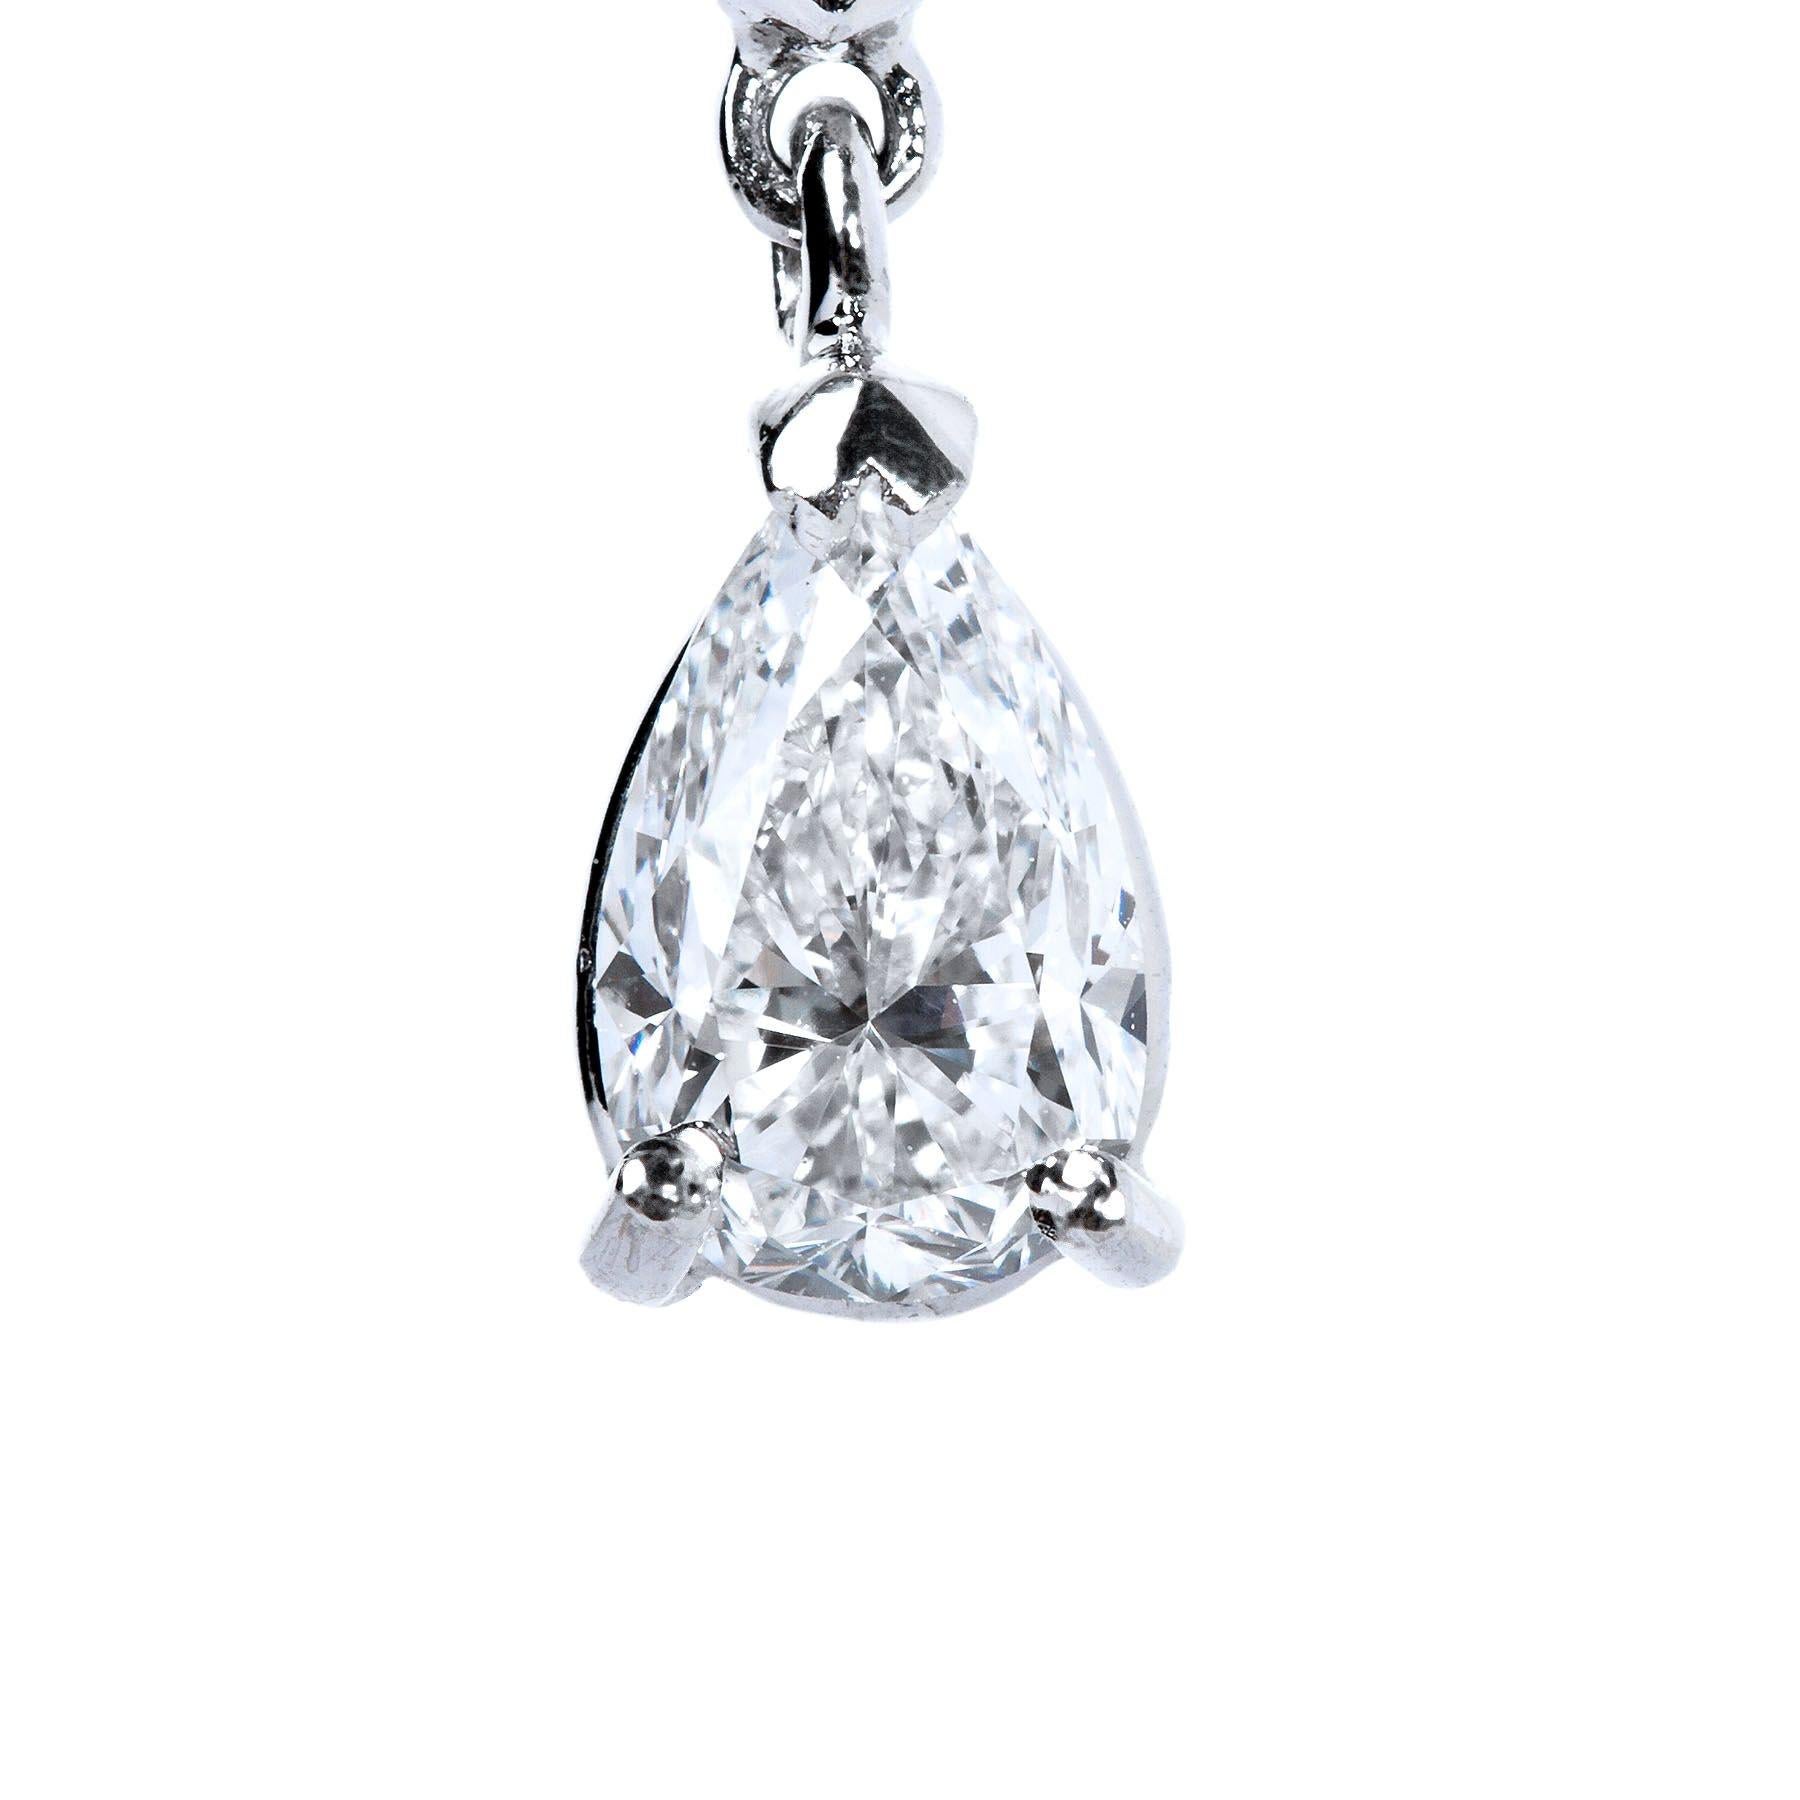 A timeless Diamond Dangle Earring.
Beautiful drop earrings set with white diamond pear shape and marquees cut diamonds.
4 1/2 Total carat weight.

Viewings available in our NYC wholesale office by appointment. please contact us for more